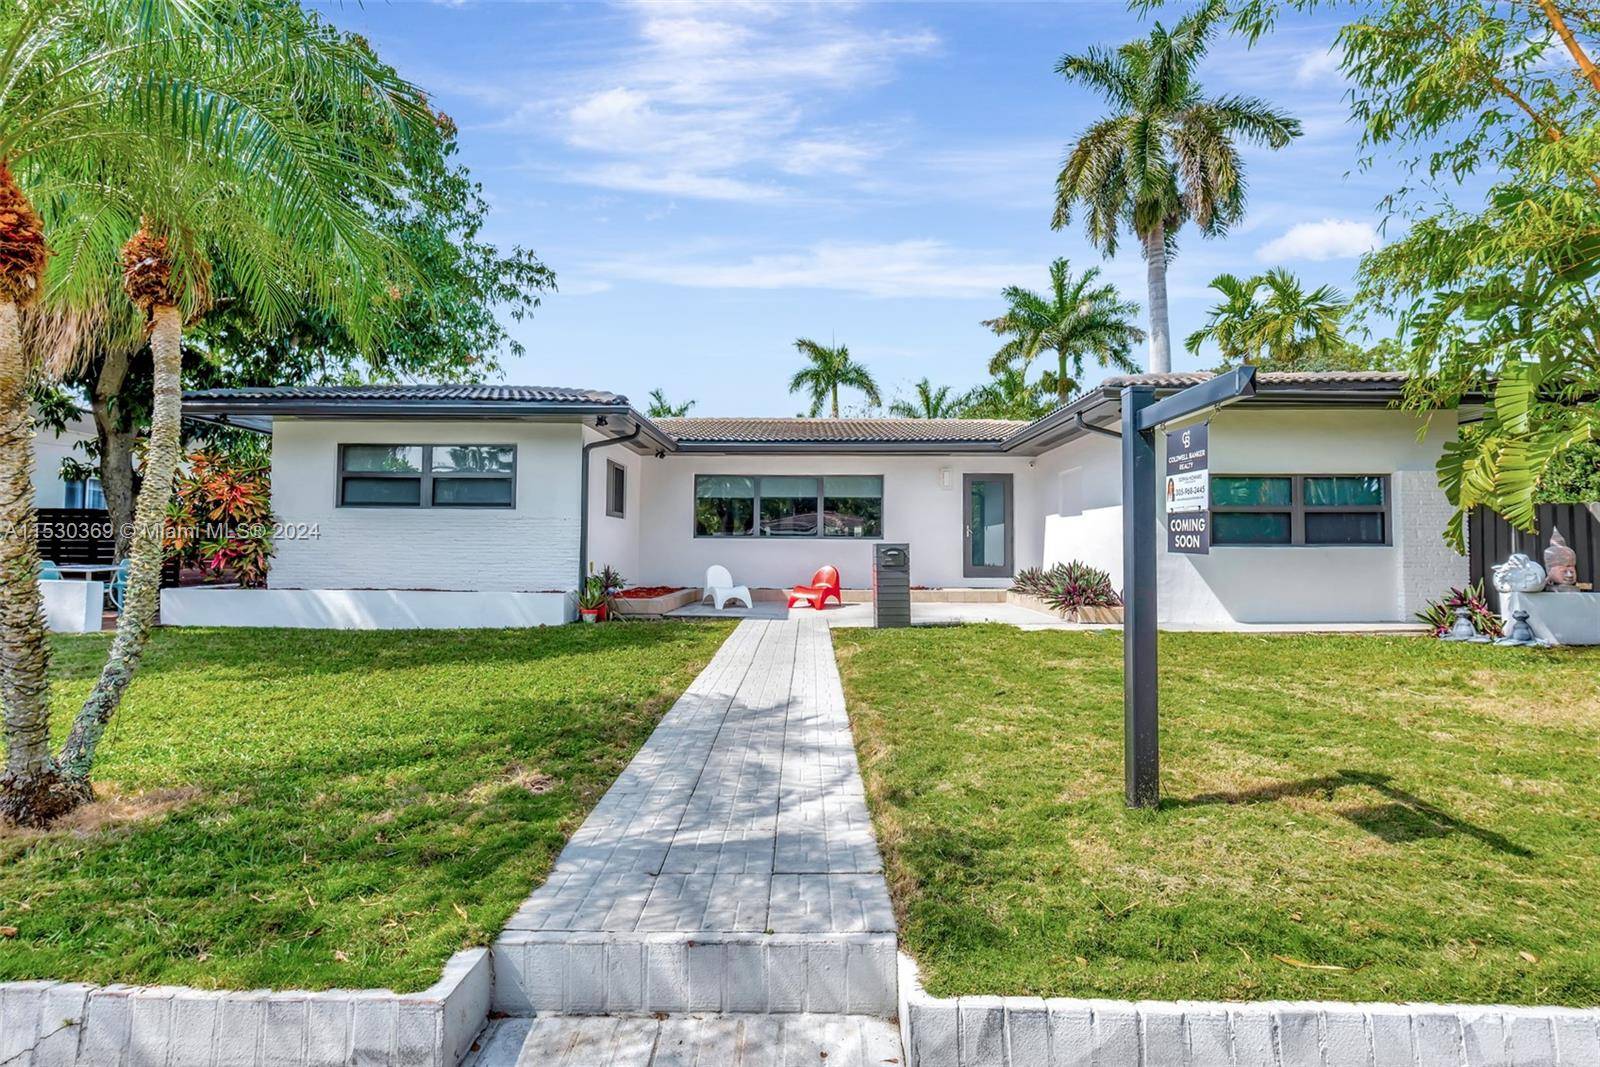 Welcome to this stunning mid century home, nestled in desirable Miami Shores golf club community, situated on a beautiful private street.